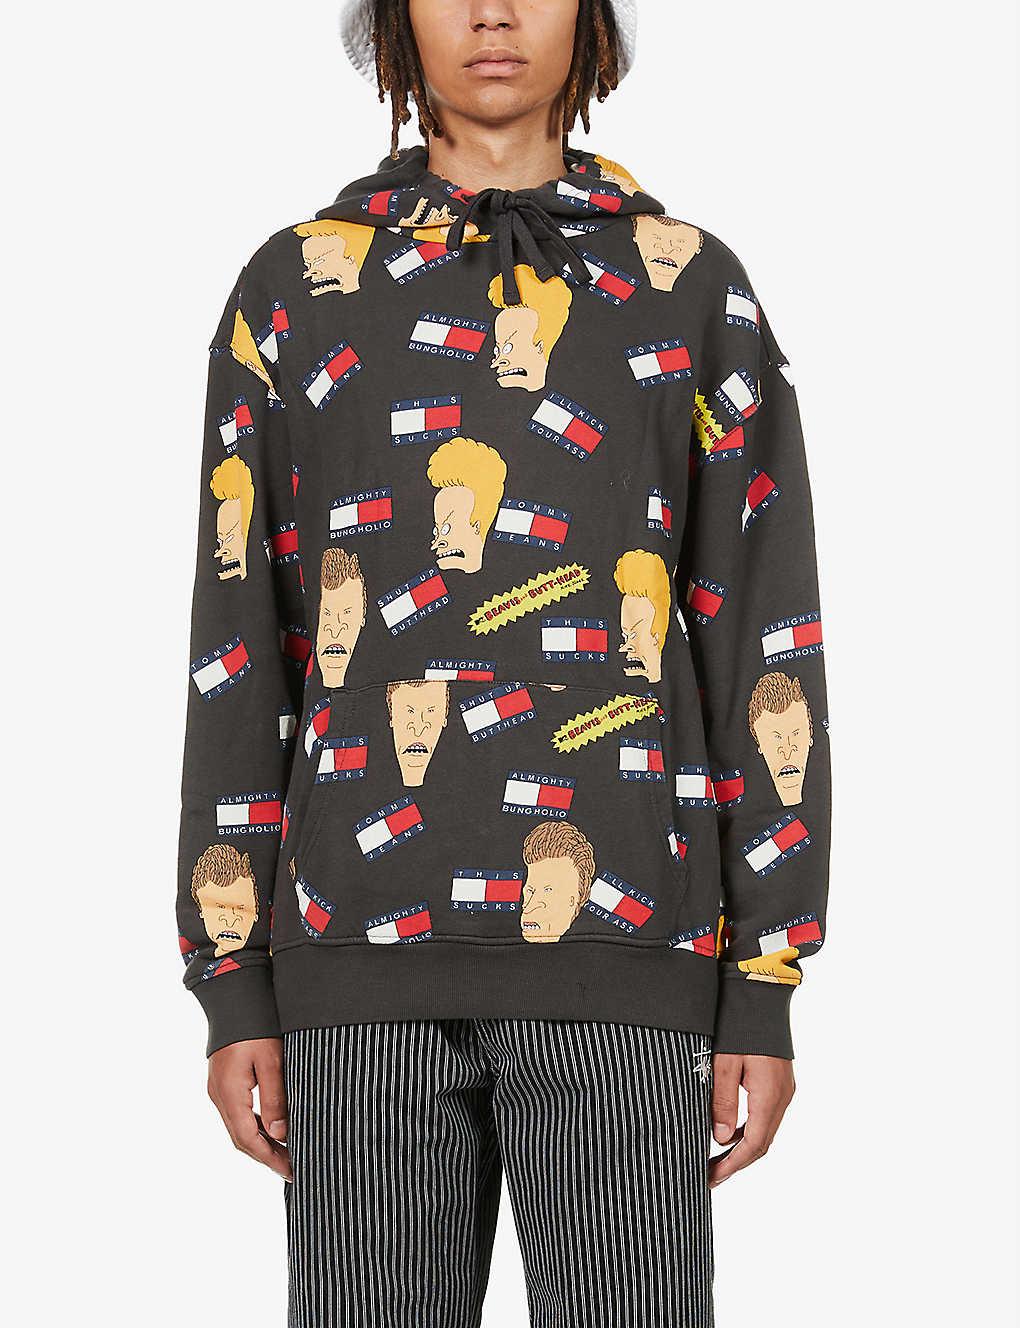 Tommy Hilfiger Mens Blackout X Mtv Beavis And Butt-head Graphic 